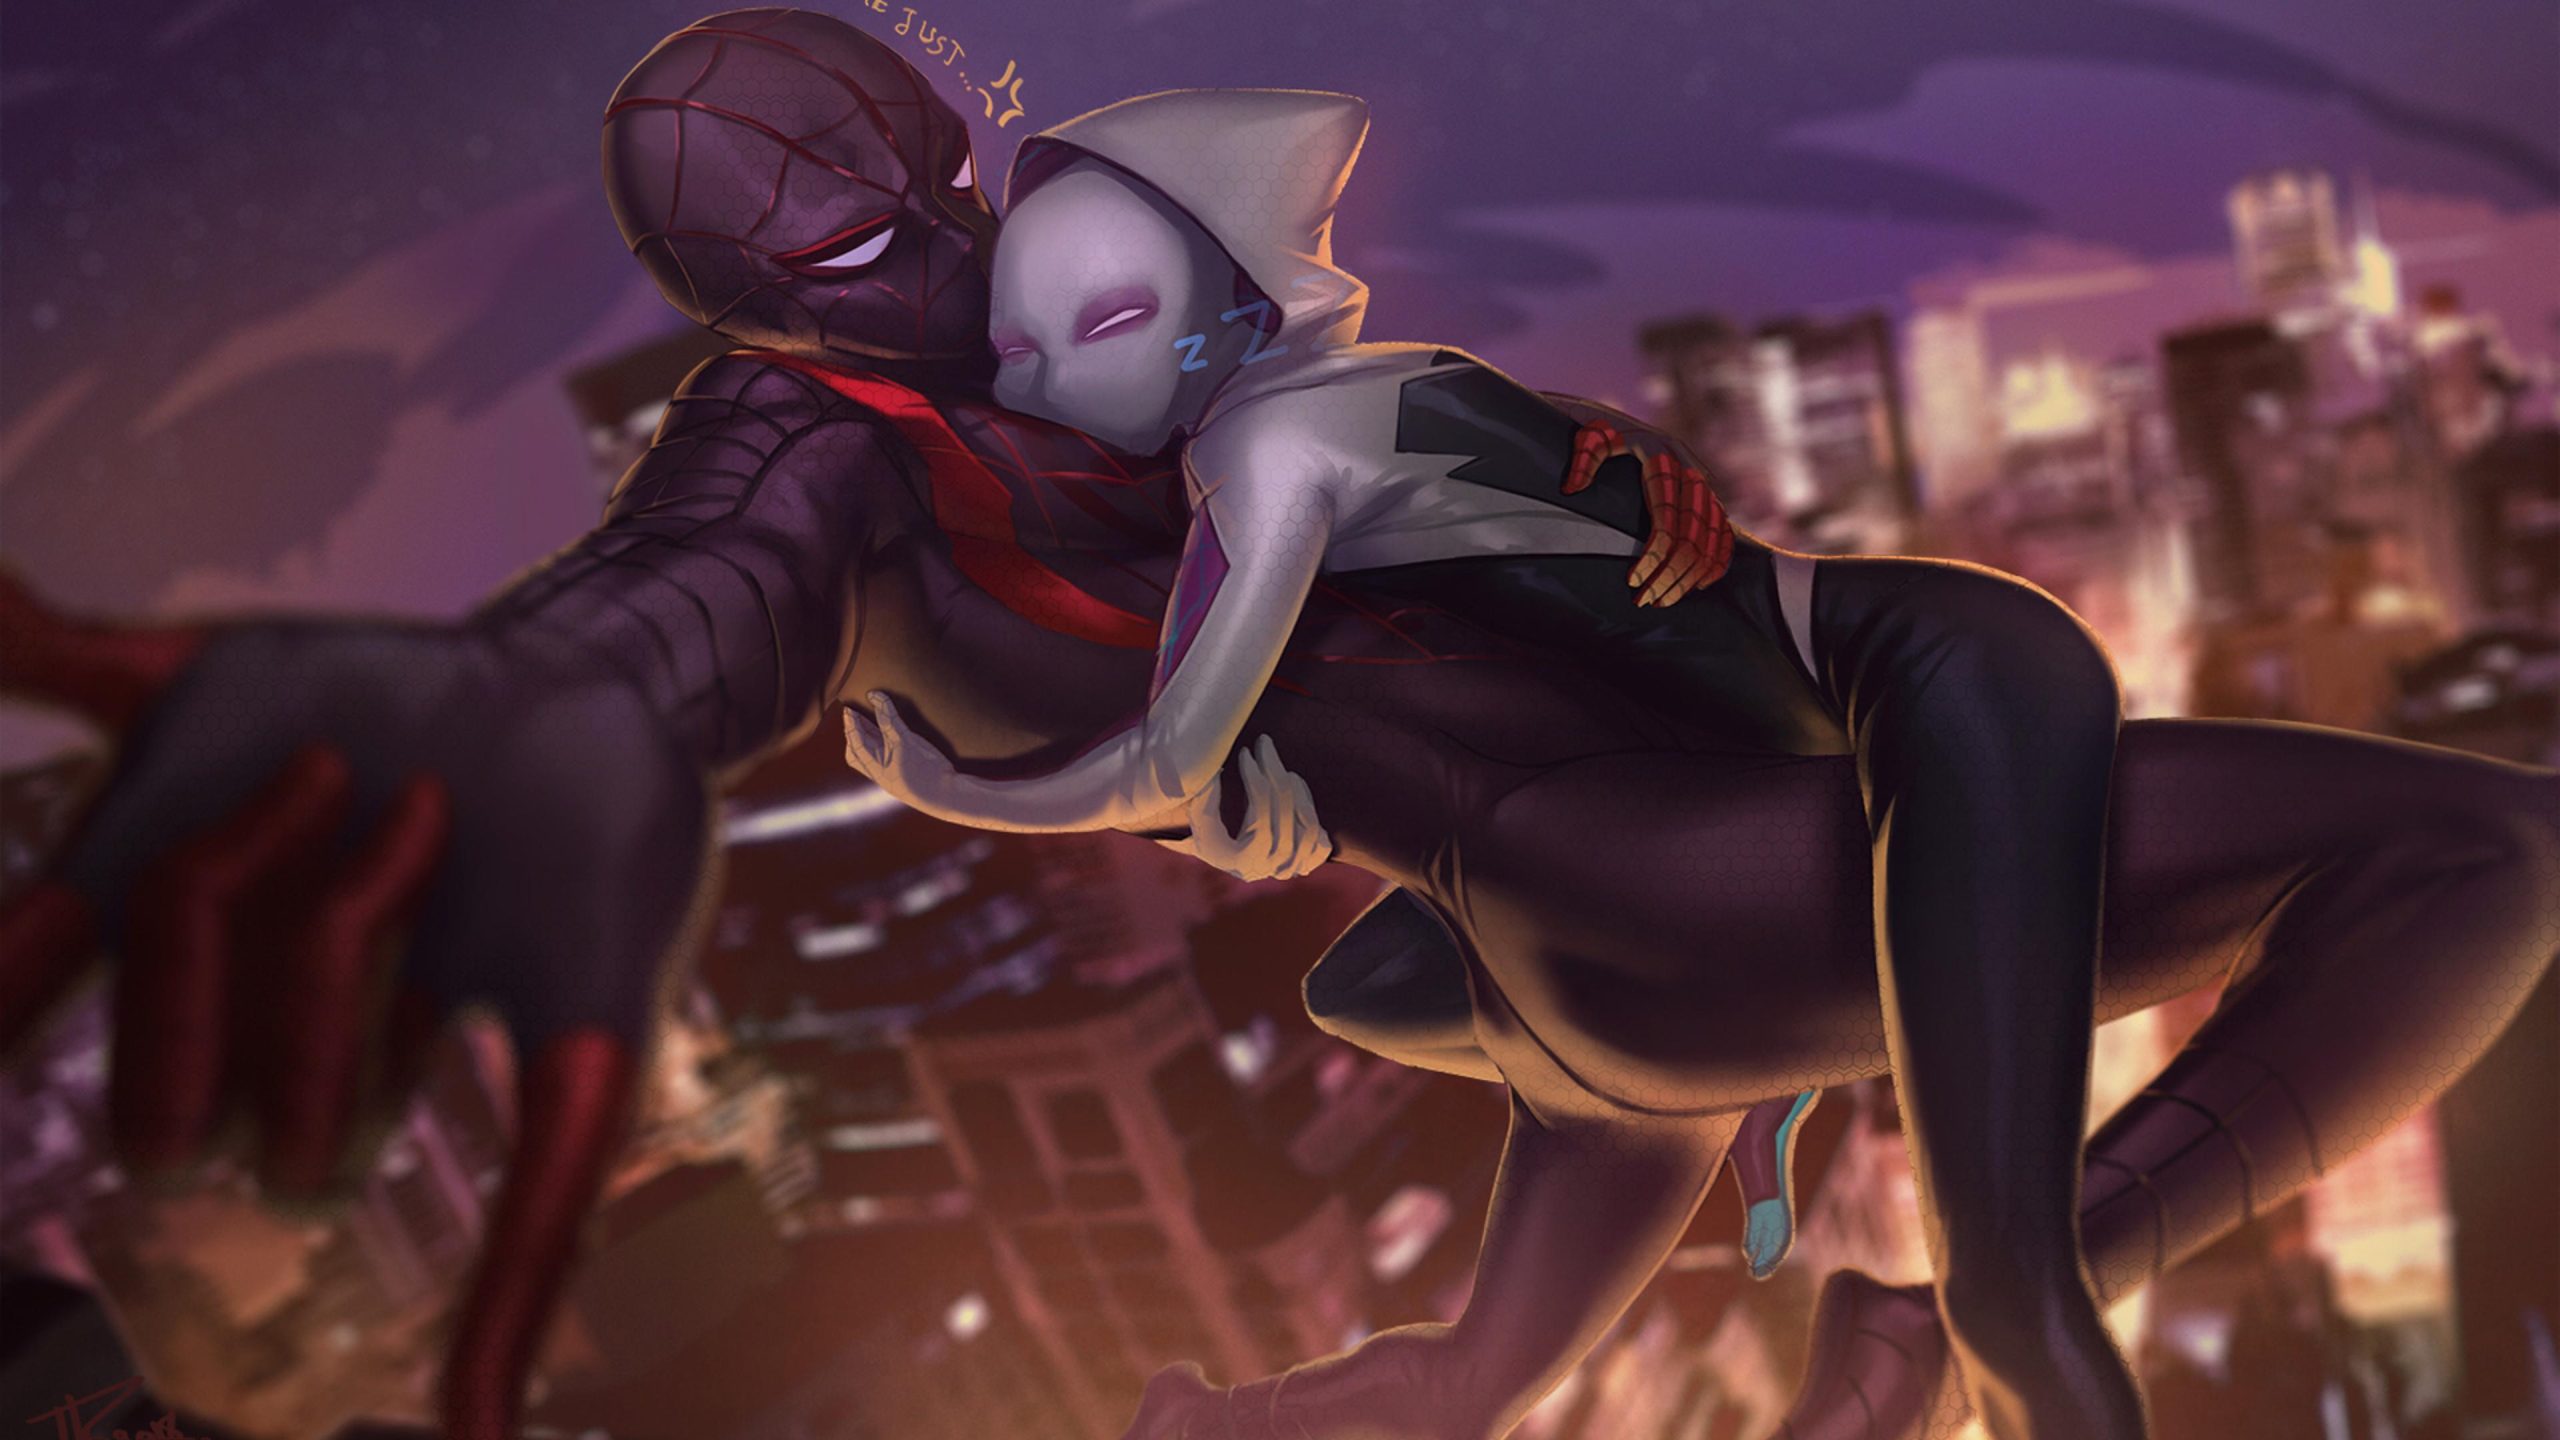 Miles Morales And Gwen Stacy Free Desktop Wallpaper, Miles Morales And Gwen Stacy, Movies